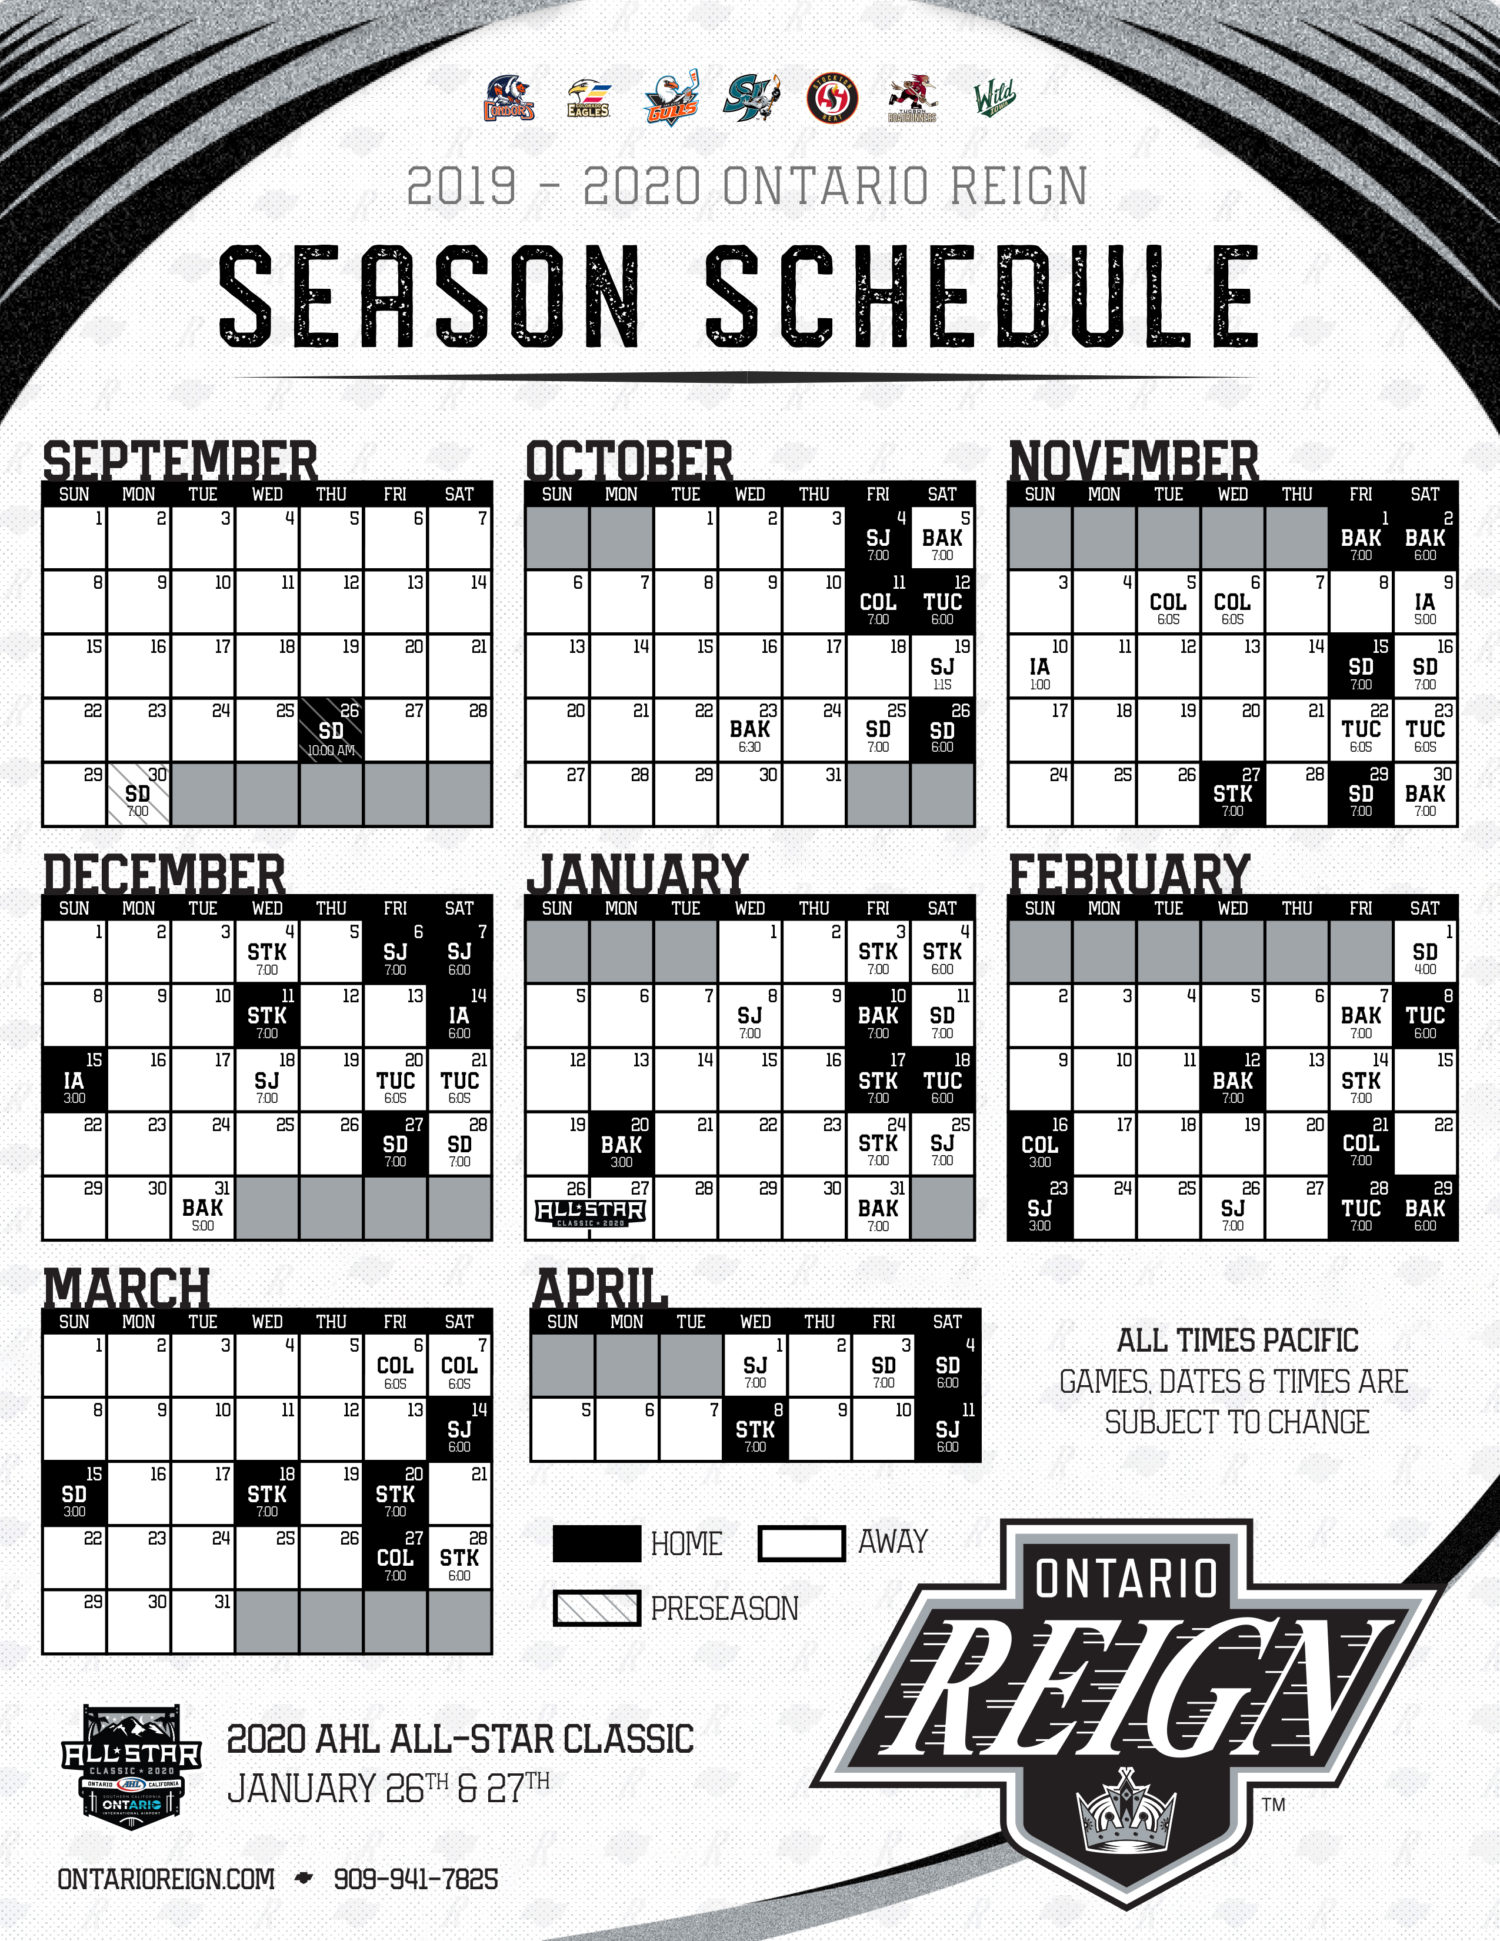 The 201920 Ontario Reign schedule Facts, Stats, Tidbits and other